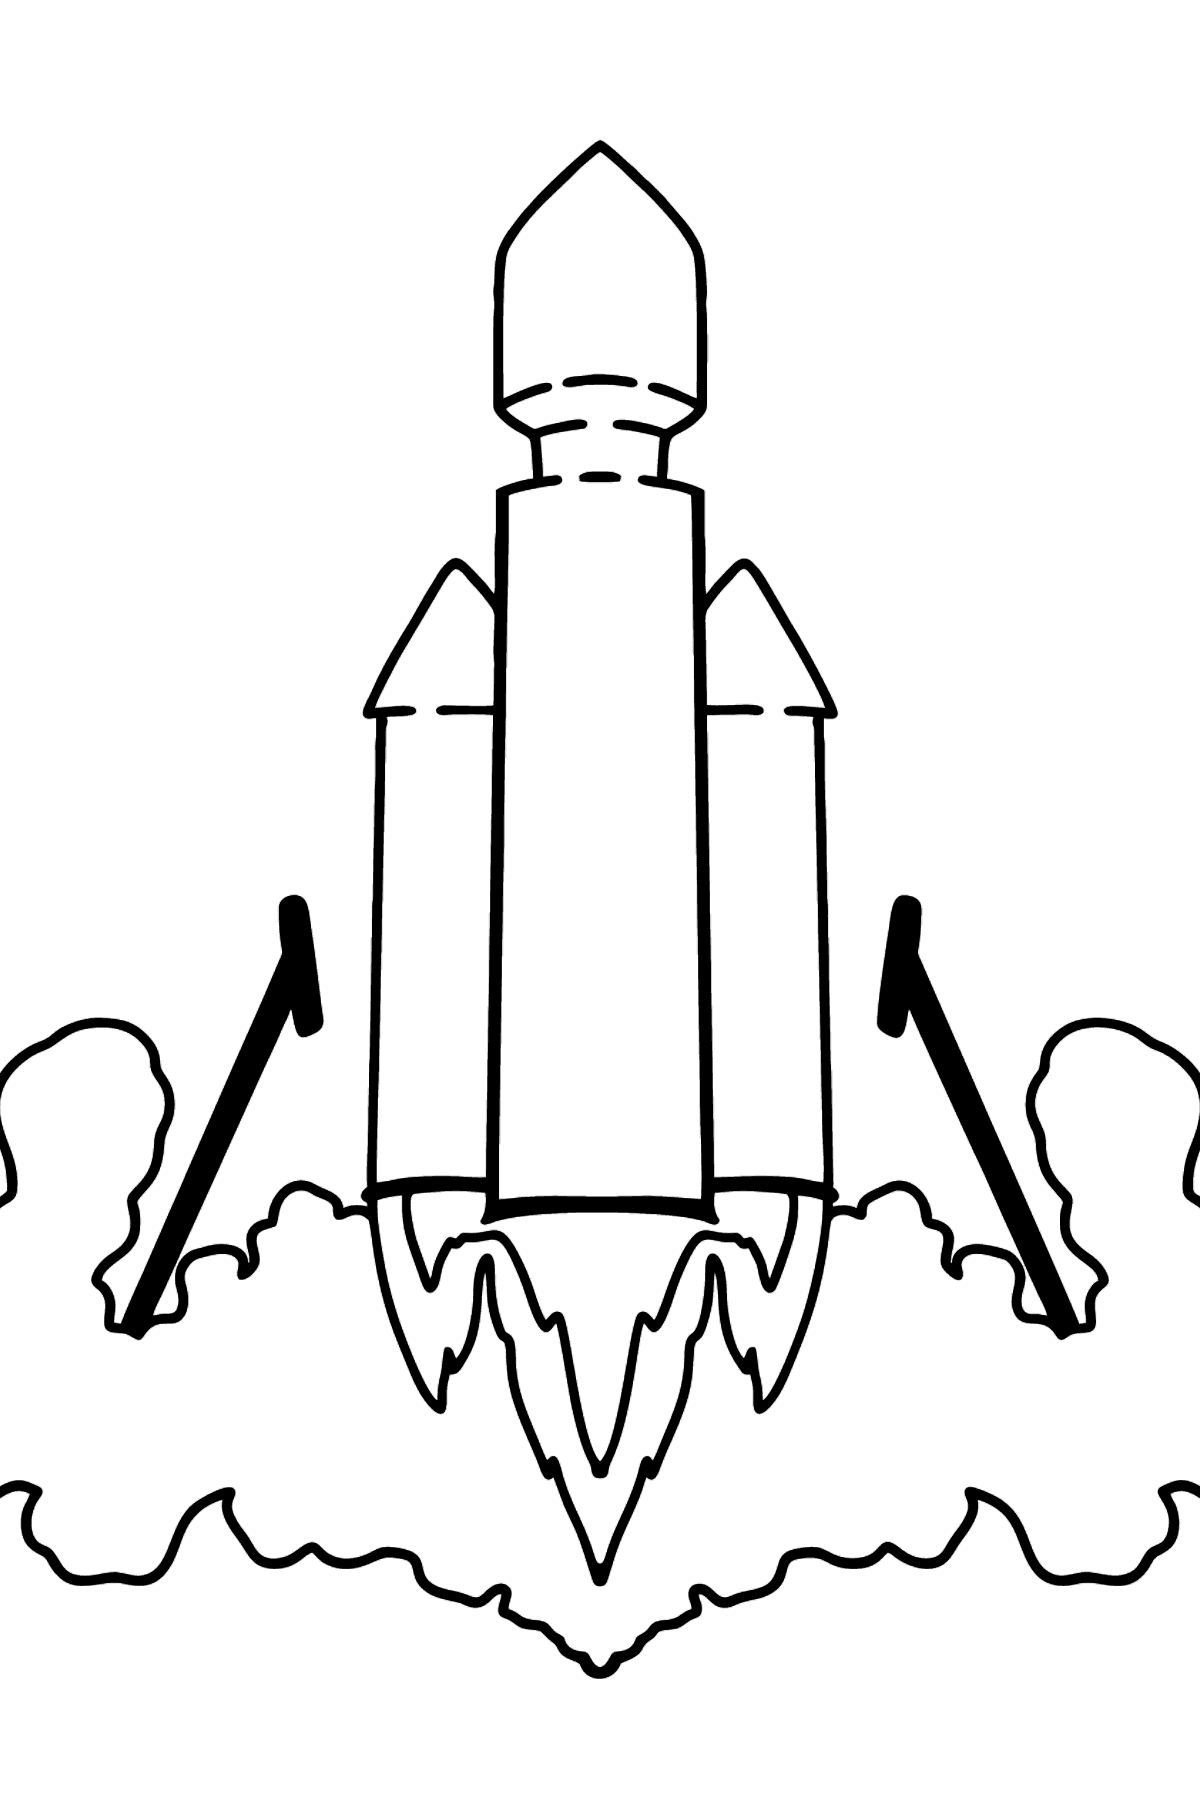 Rocket Launch coloring page - Coloring Pages for Kids